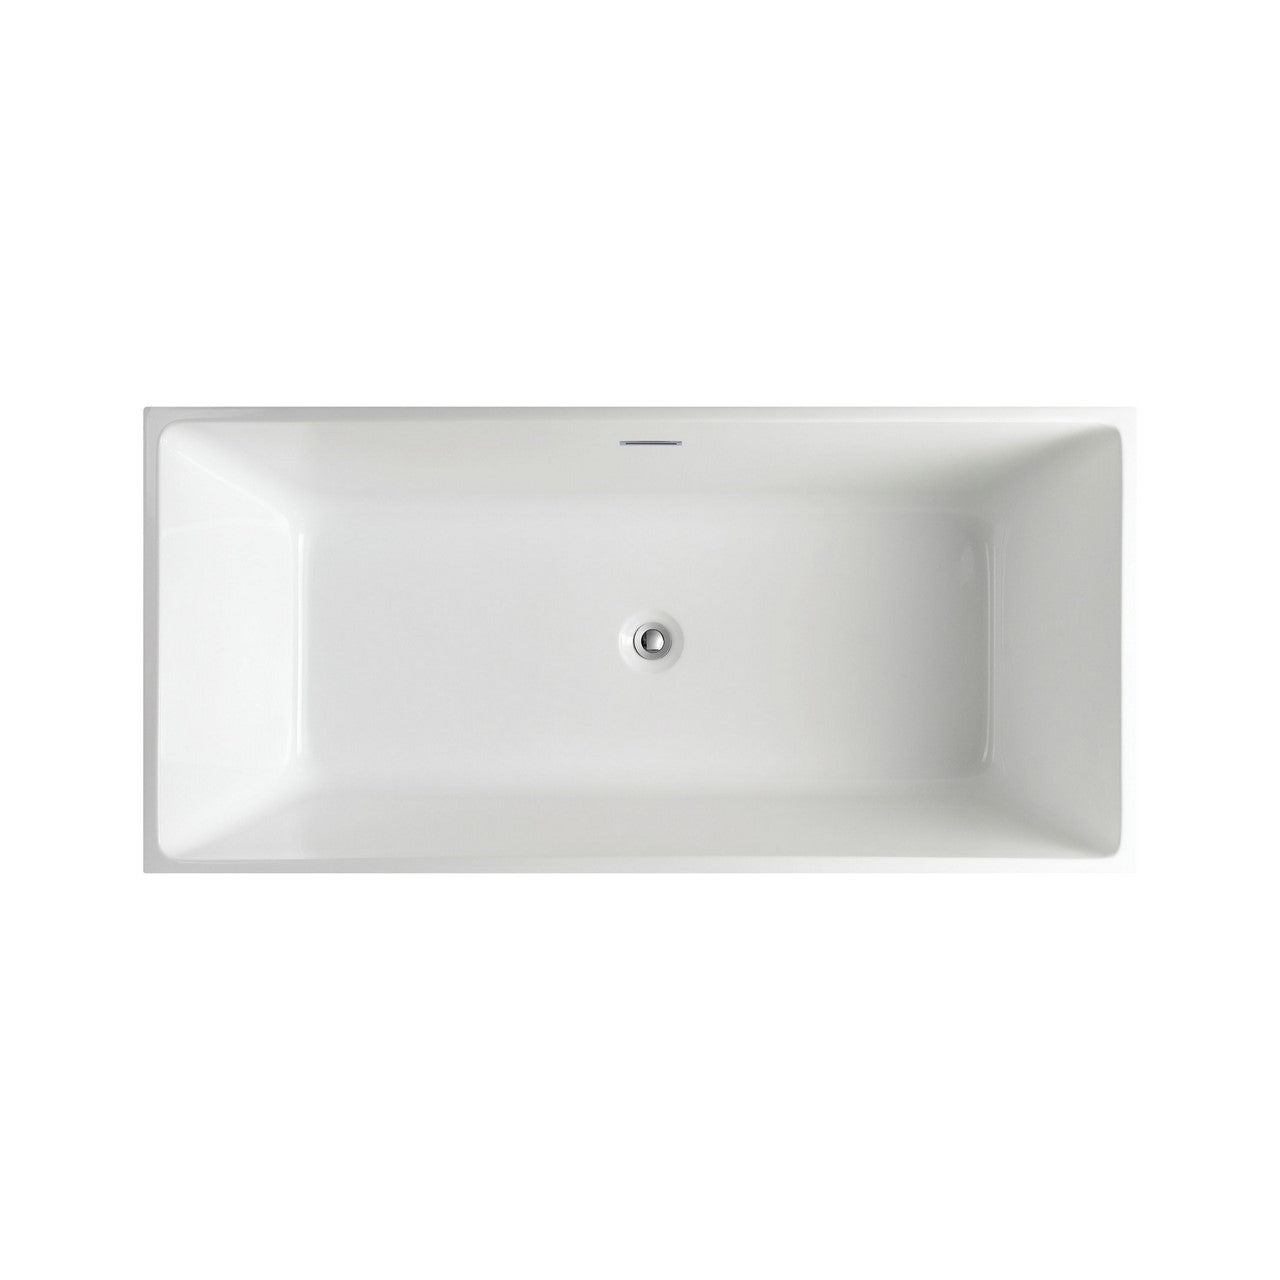 Kube Bath Squadra Free Standing Bathtub Collection in 59" 63" and 67"